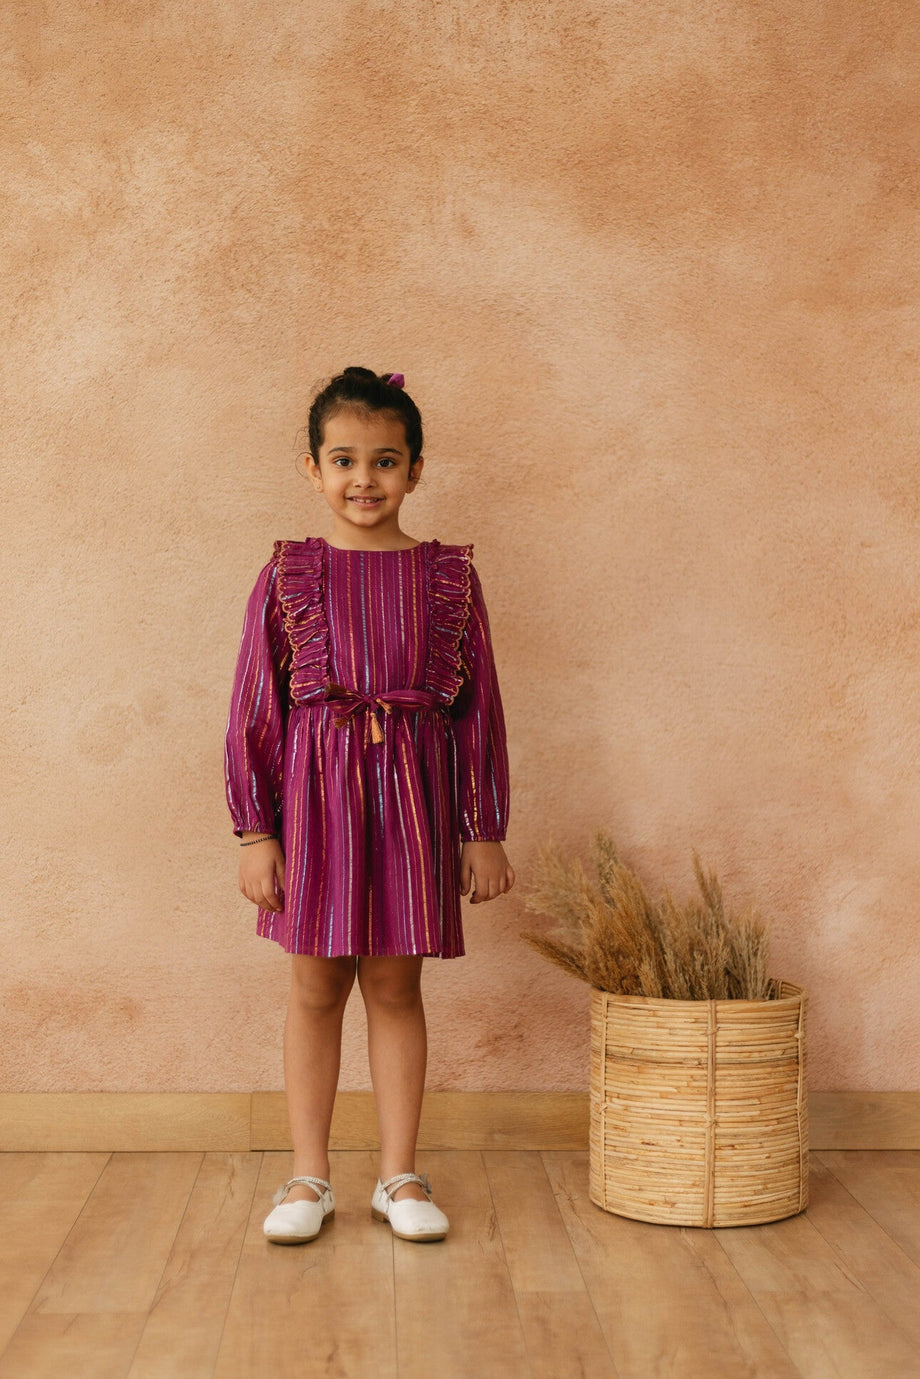 Shop Kids Party Wear Online | Couture Dresses for Girl – www.liandli.in